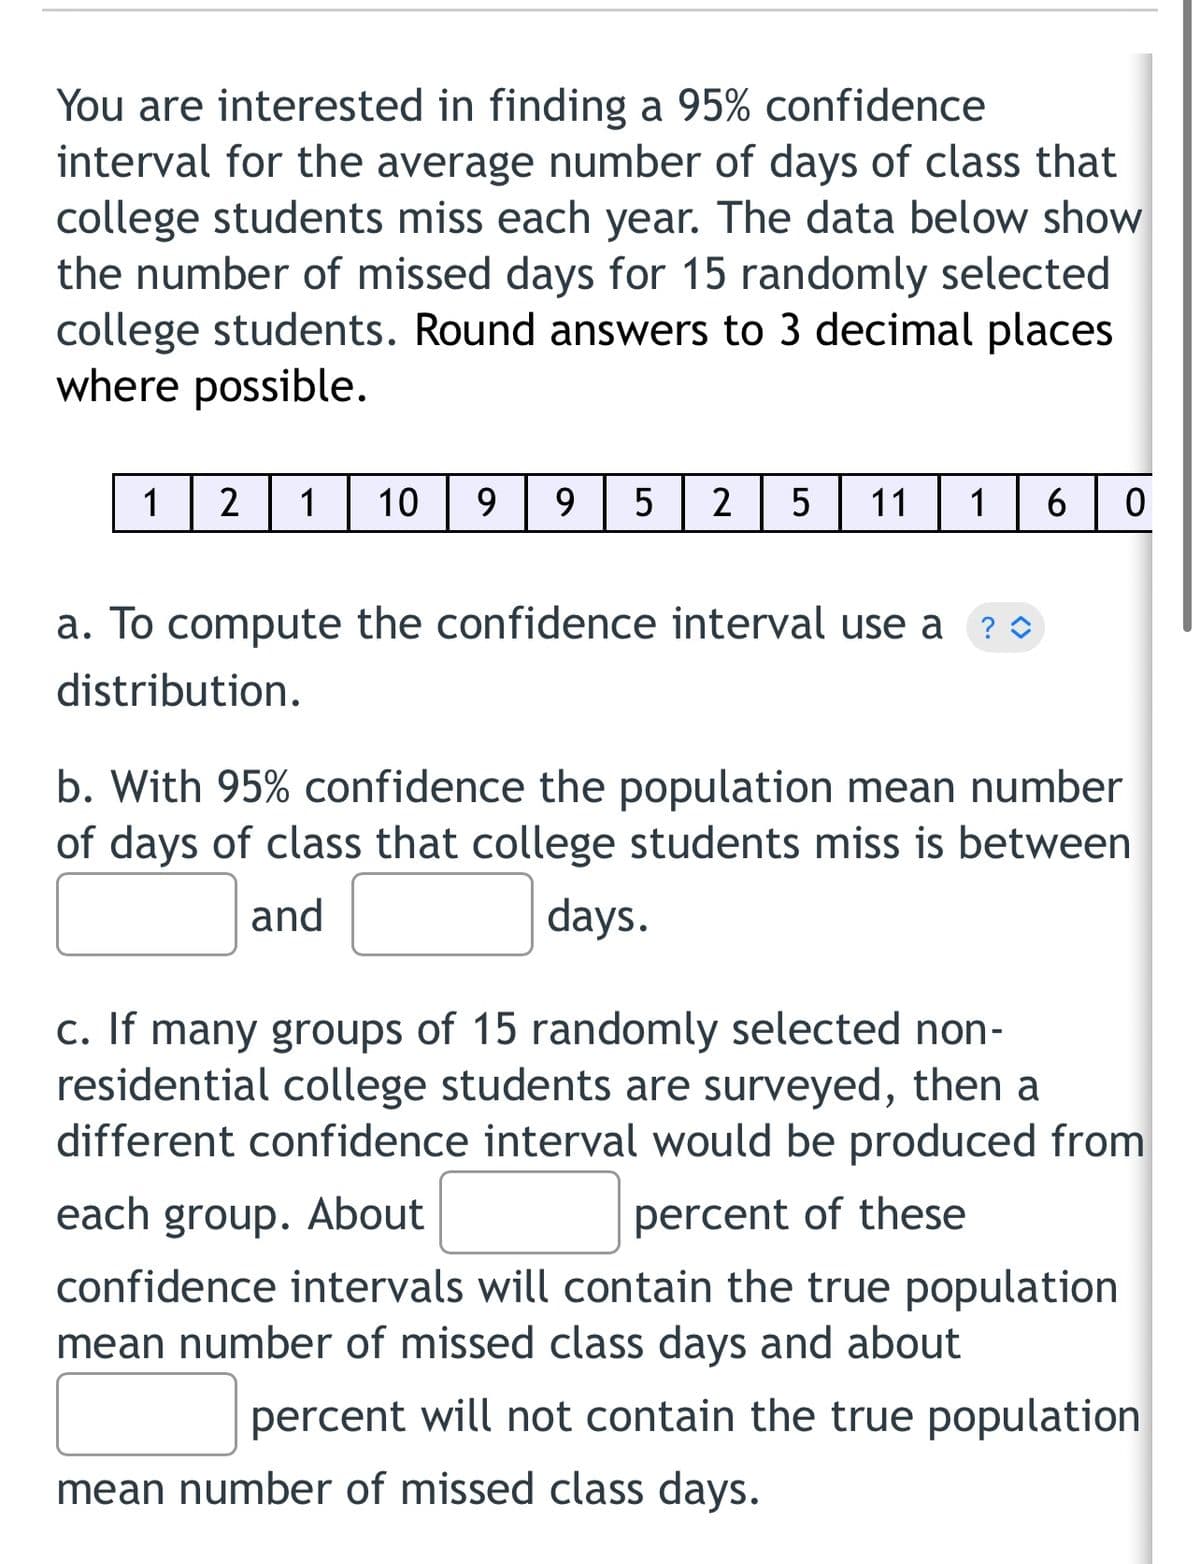 You are interested in finding a 95% confidence
interval for the average number of days of class that
college students miss each year. The data below show
the number of missed days for 15 randomly selected
college students. Round answers to 3 decimal places
where possible.
1
2
1
10
9
2
11
1
a. To compute the confidence interval use a ?0
distribution.
b. With 95% confidence the population mean number
of days of class that college students miss is between
and
days.
c. If many groups of 15 randomly selected non-
residential college students are surveyed, then a
different confidence interval would be produced from
each group. About
percent of these
confidence intervals will contain the true population
mean number of missed class days and about
percent will not contain the true population
mean number of missed class days.
